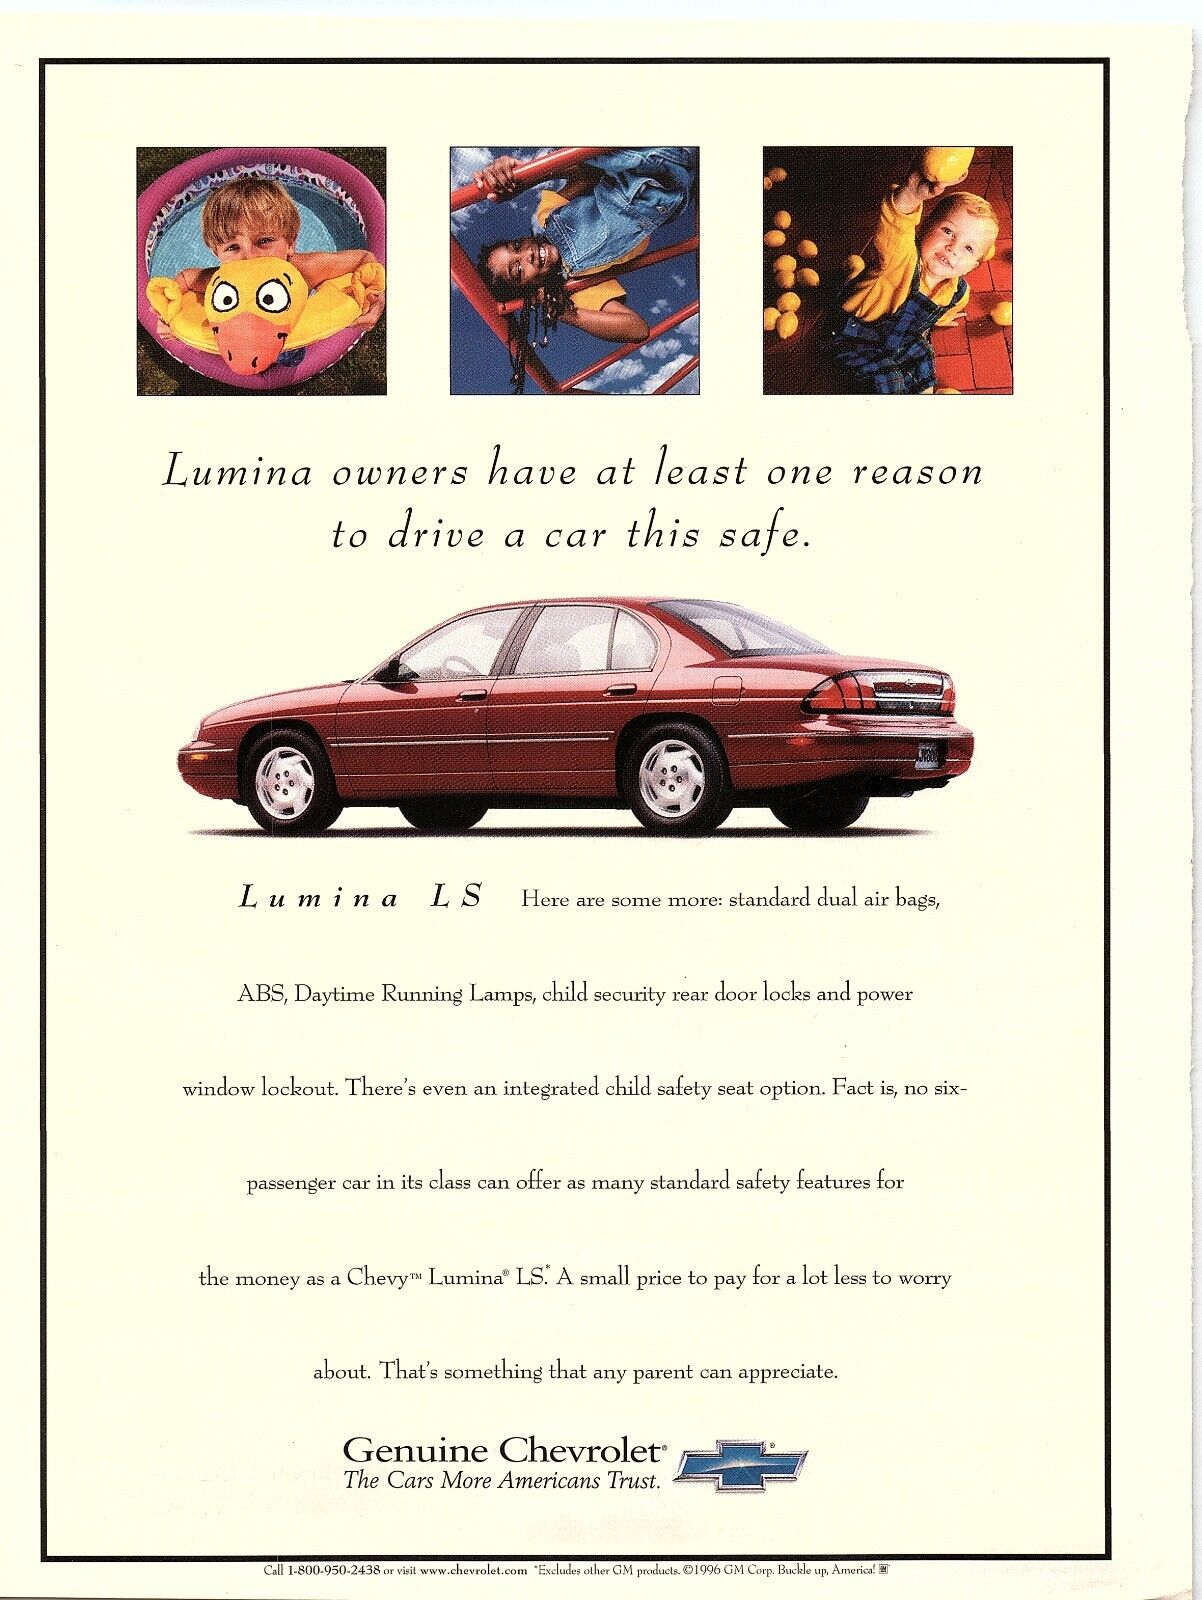 1988 CHEVROLET LUMINA LS THE CARS MORE AMERICANS TRUST FULL PAGE PRINT AD 2548